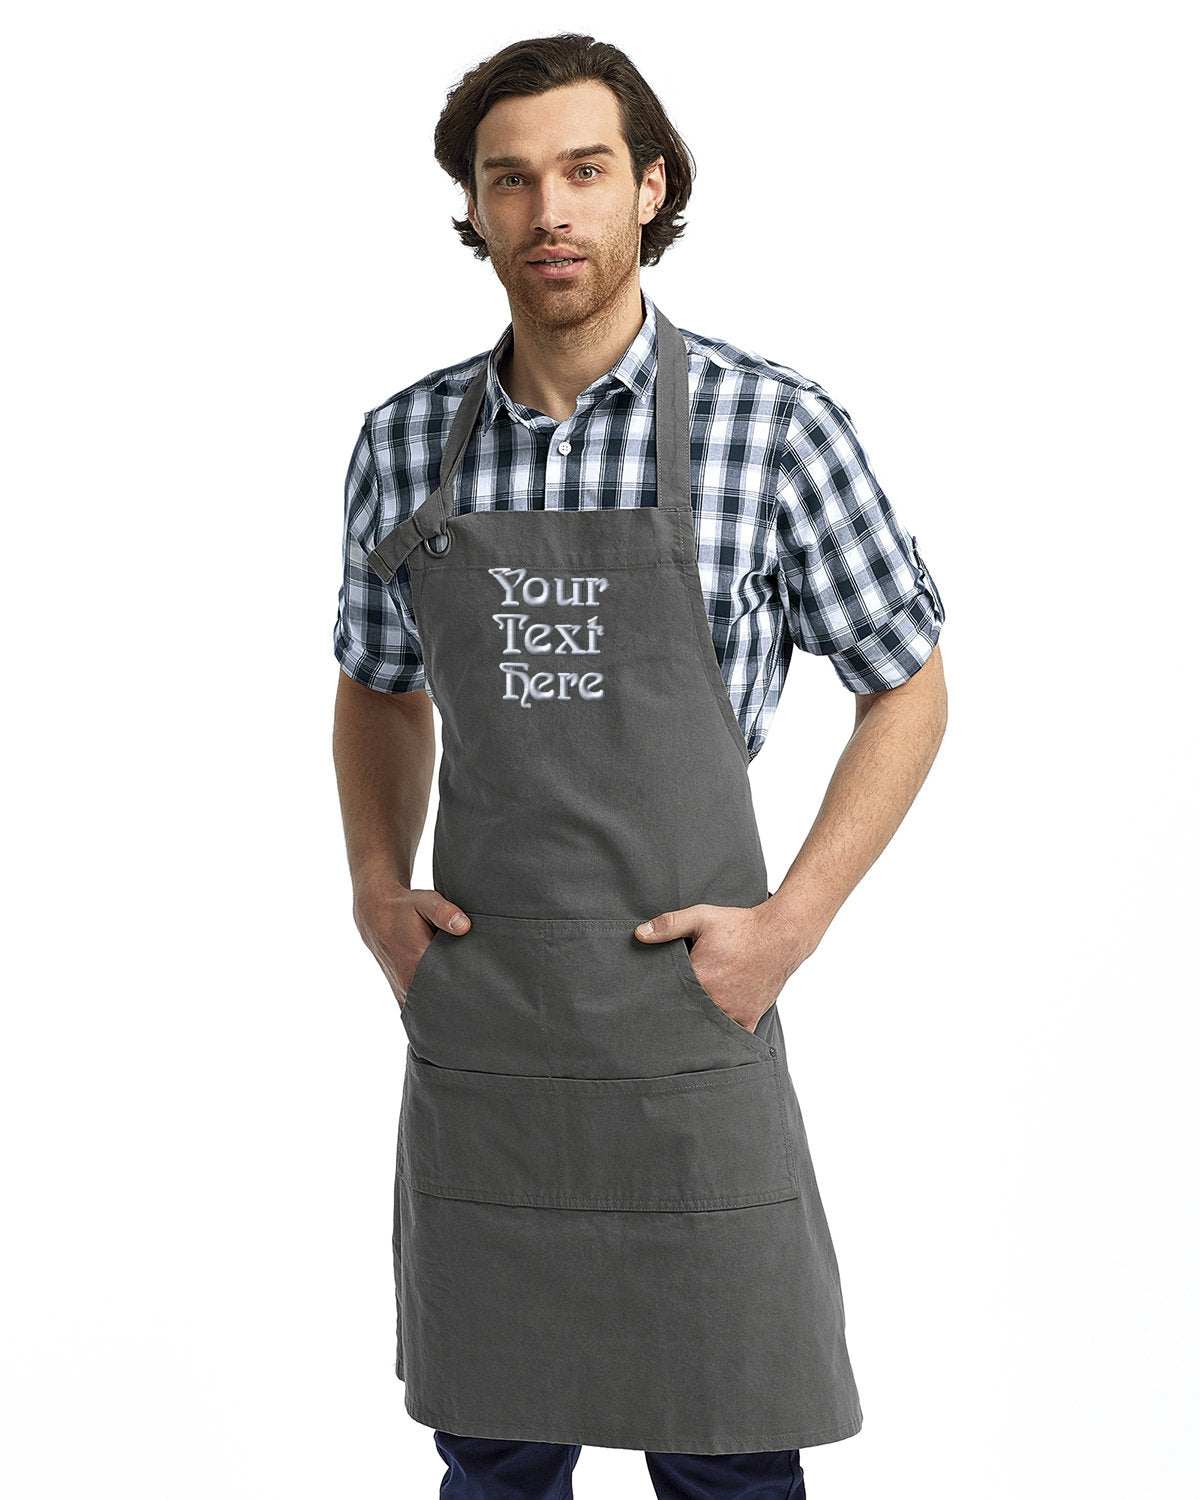 Unisex Pocket Apron Your Personalized Text Embroidered - 3 pack - dark grey